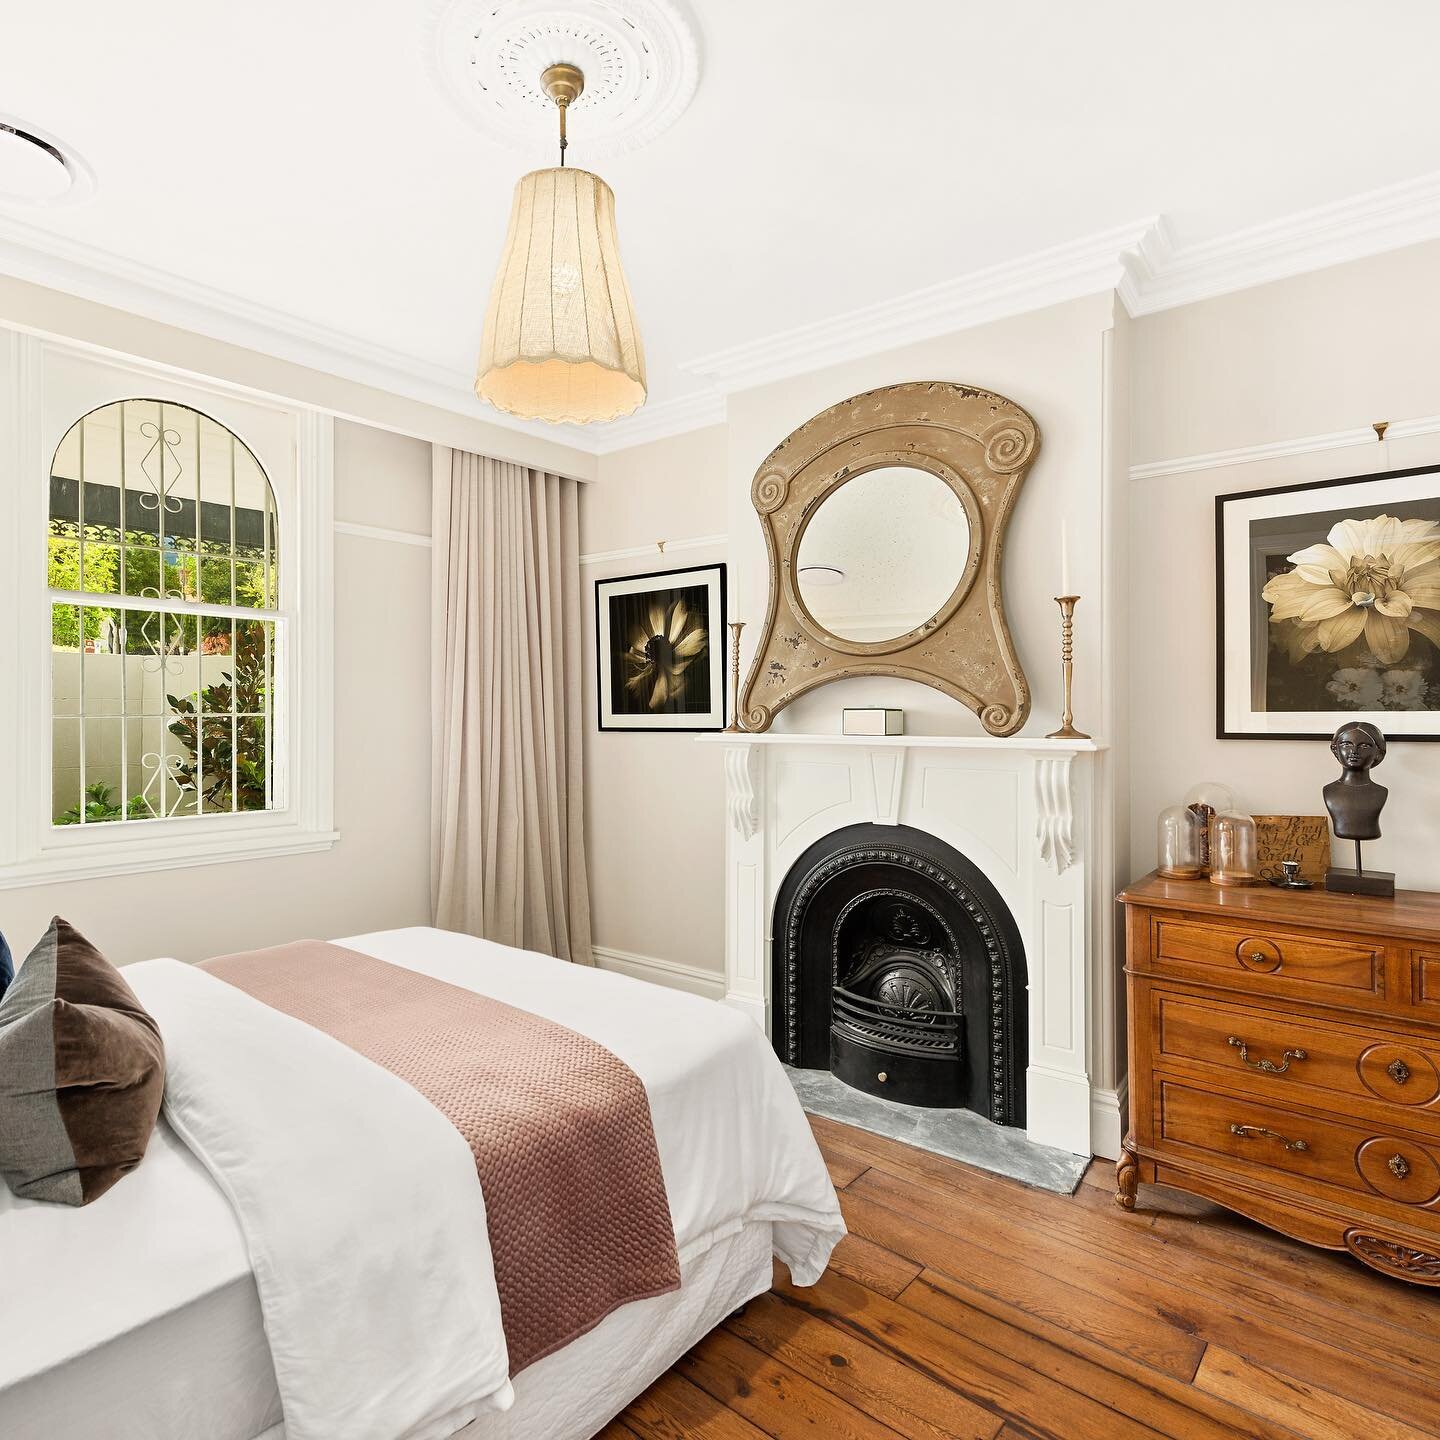 I&rsquo;d take this Guest bedroom as a main bedroom, would you agree! Recycled hardwood floors, restored original fire place and puddling curtains 😍 #recycledmaterials #recycledtimber #fireplace  #heritage #interiordesign #clienthasgoodtaste